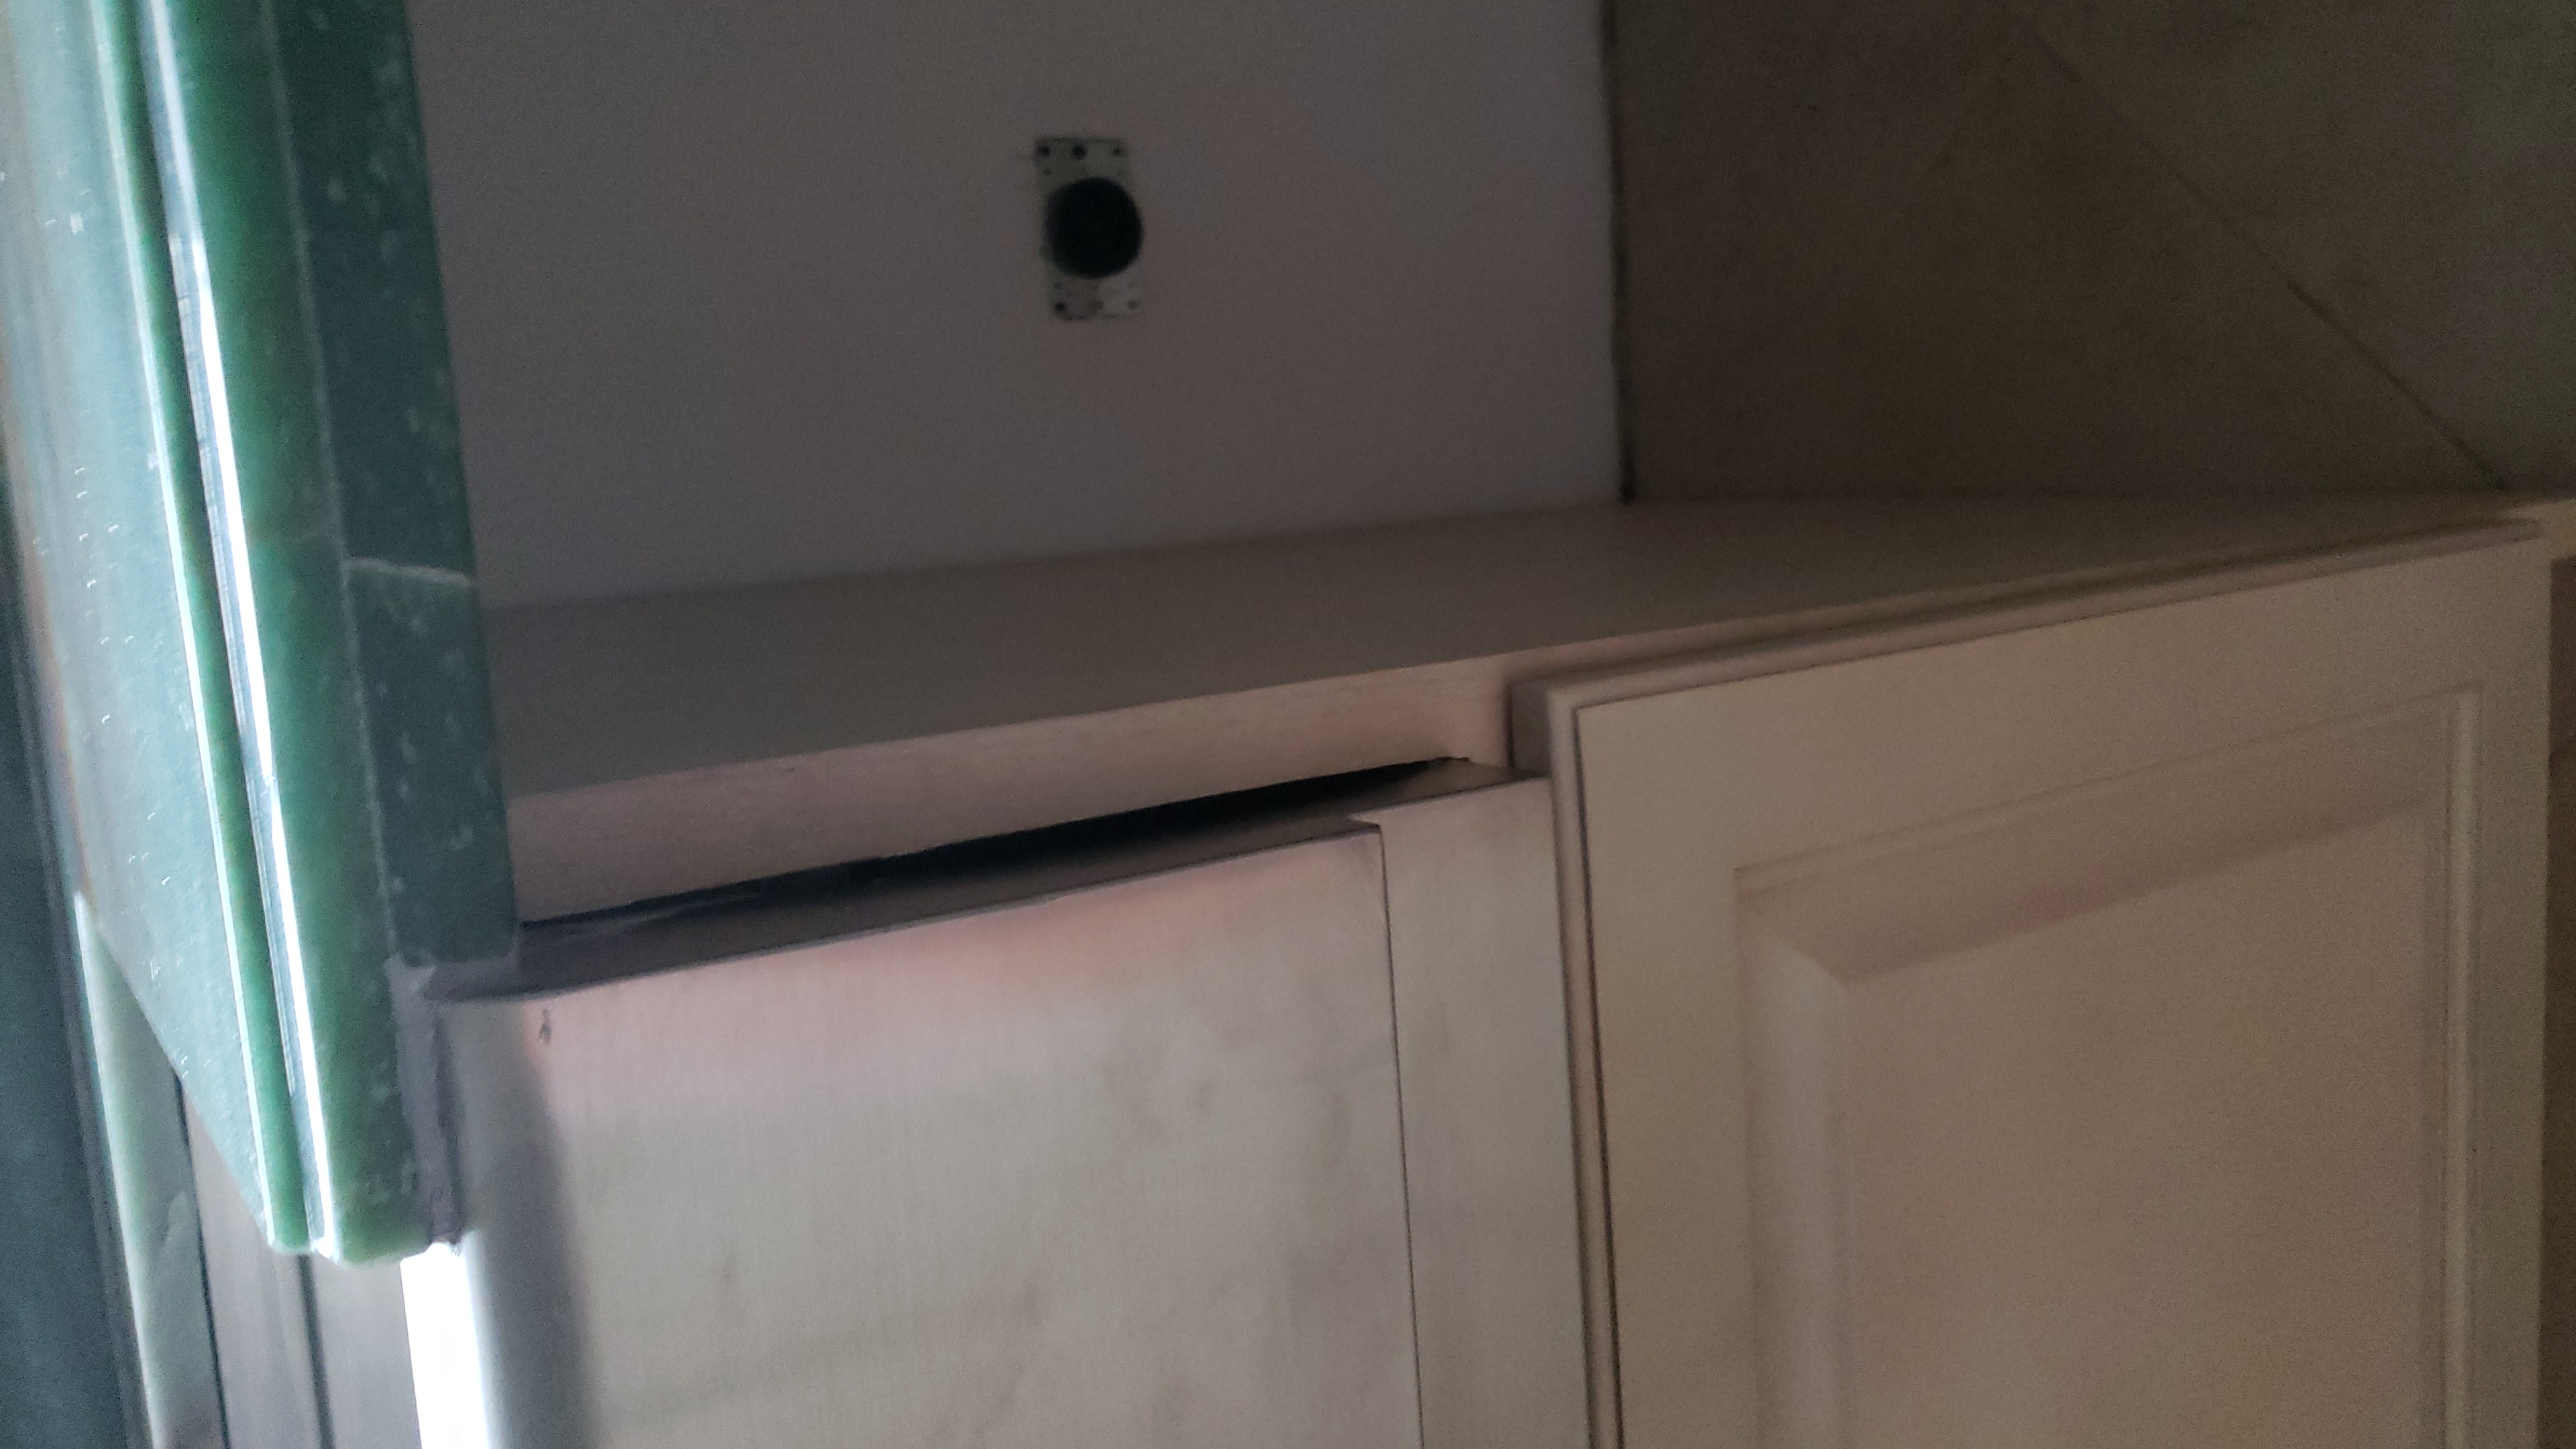 More holes in the cabinets